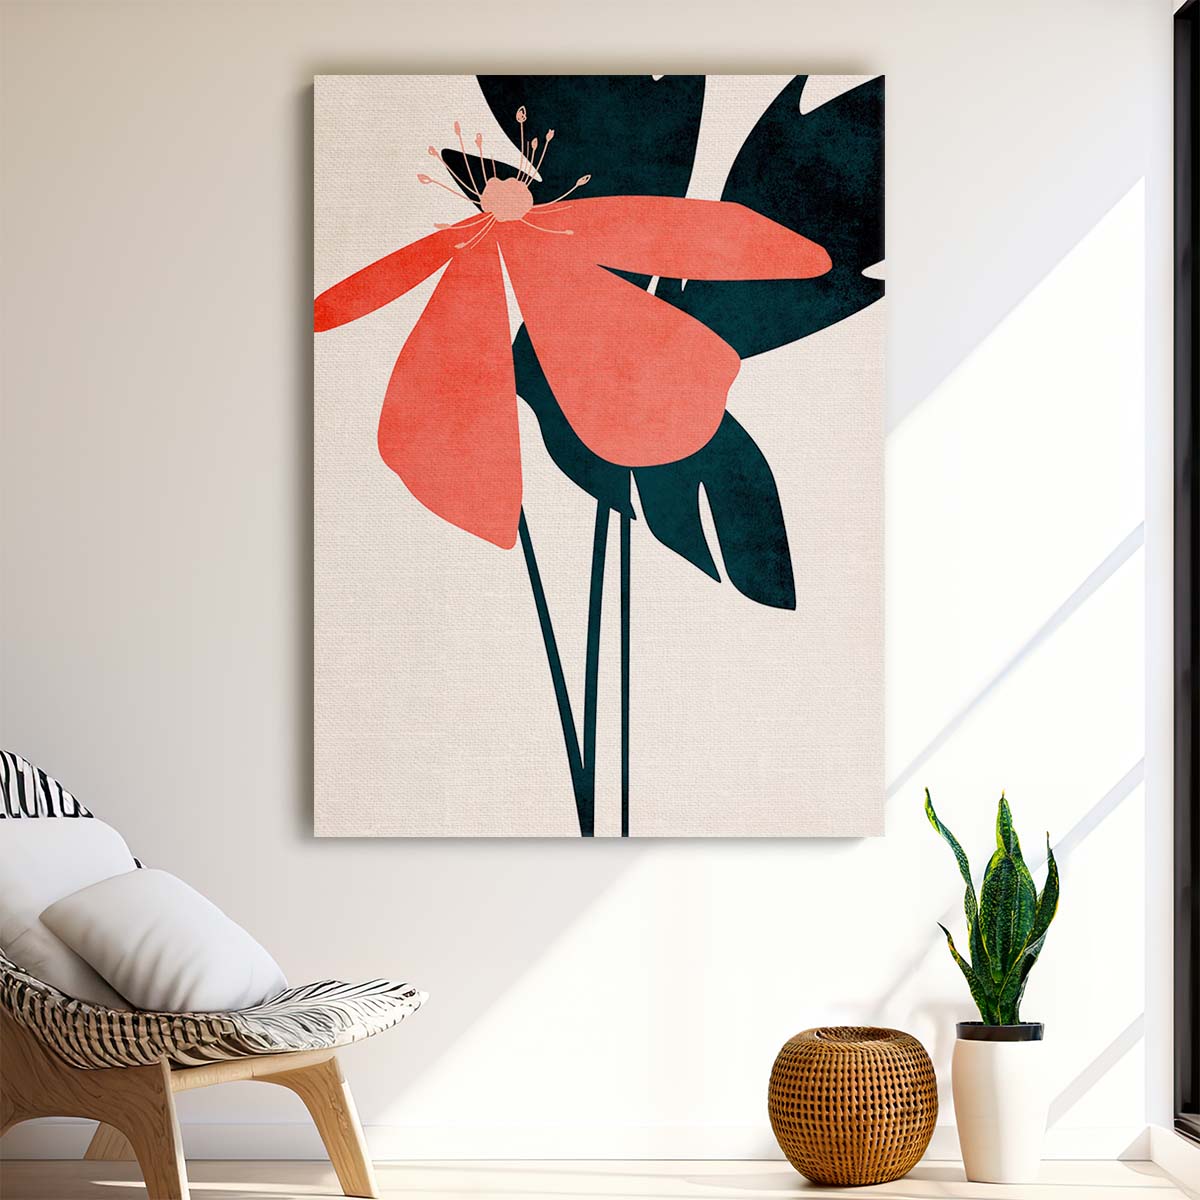 Red Flower Botanical Illustration on Bright White Background by Kubistika by Luxuriance Designs, made in USA